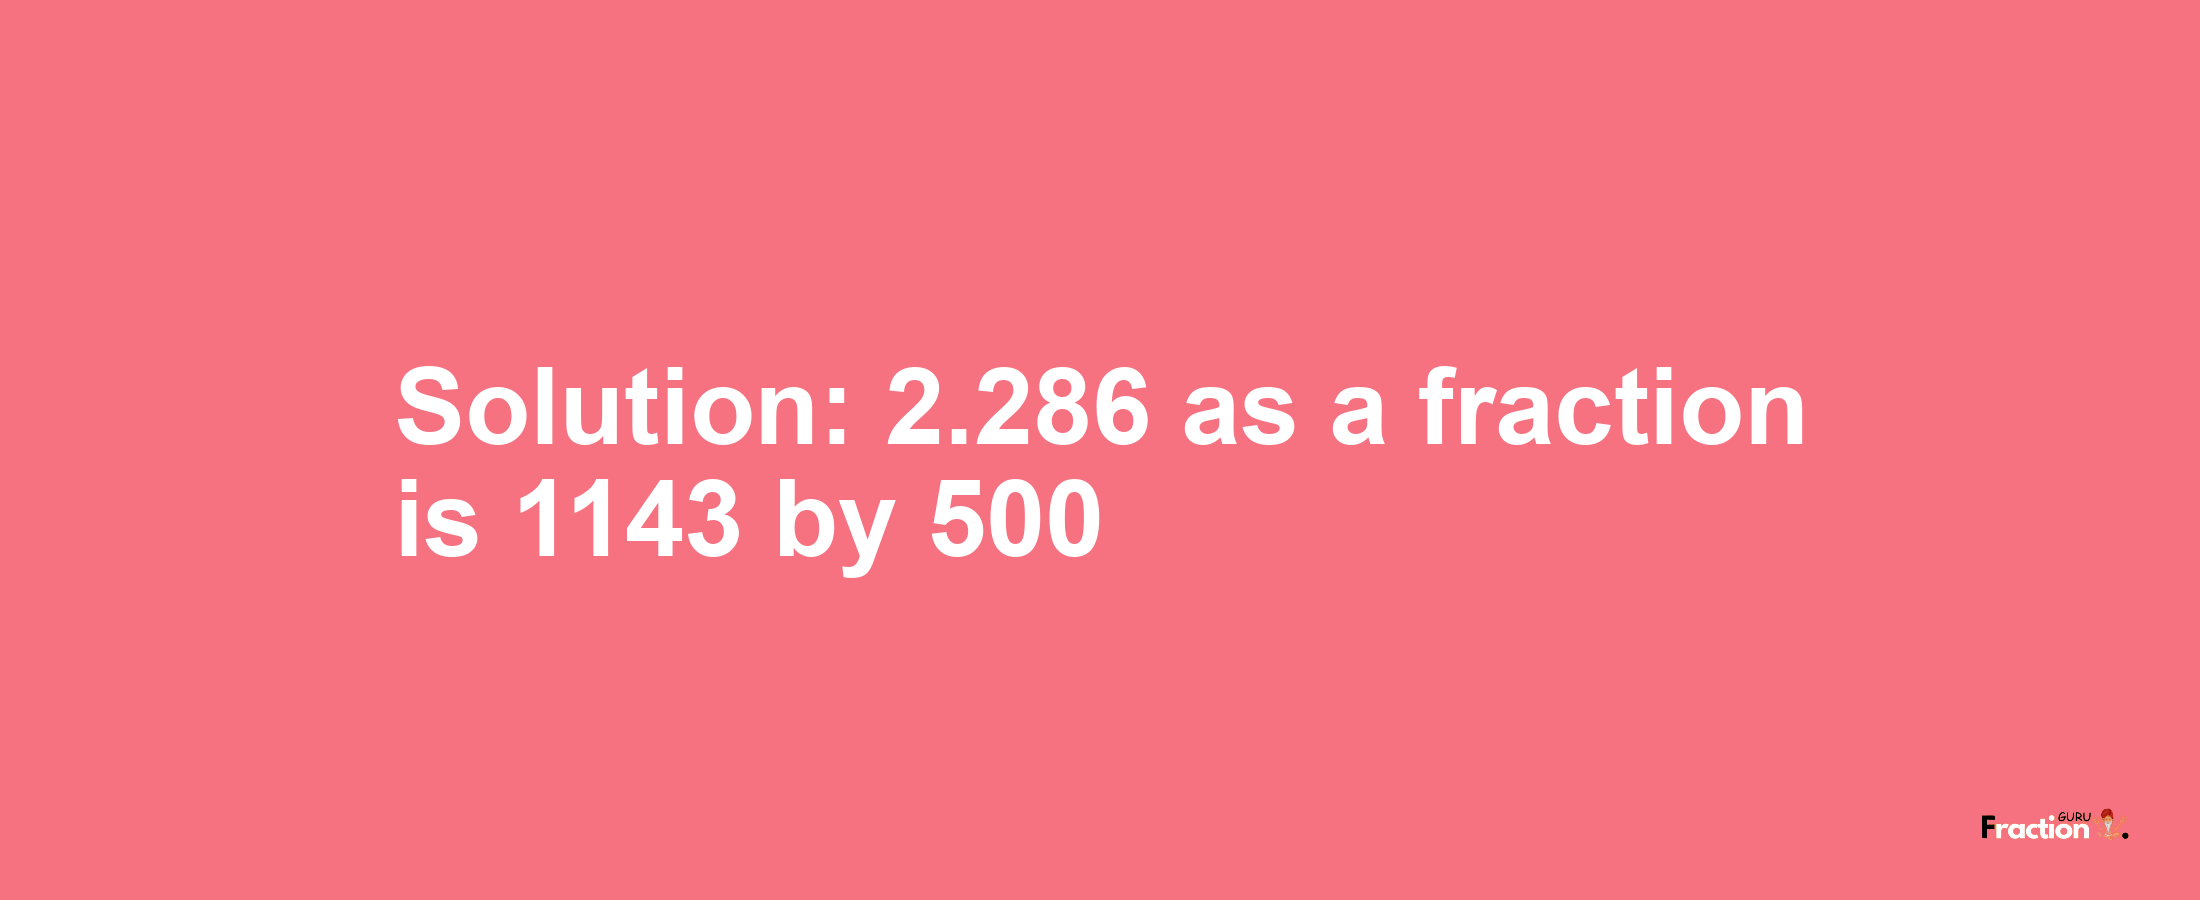 Solution:2.286 as a fraction is 1143/500